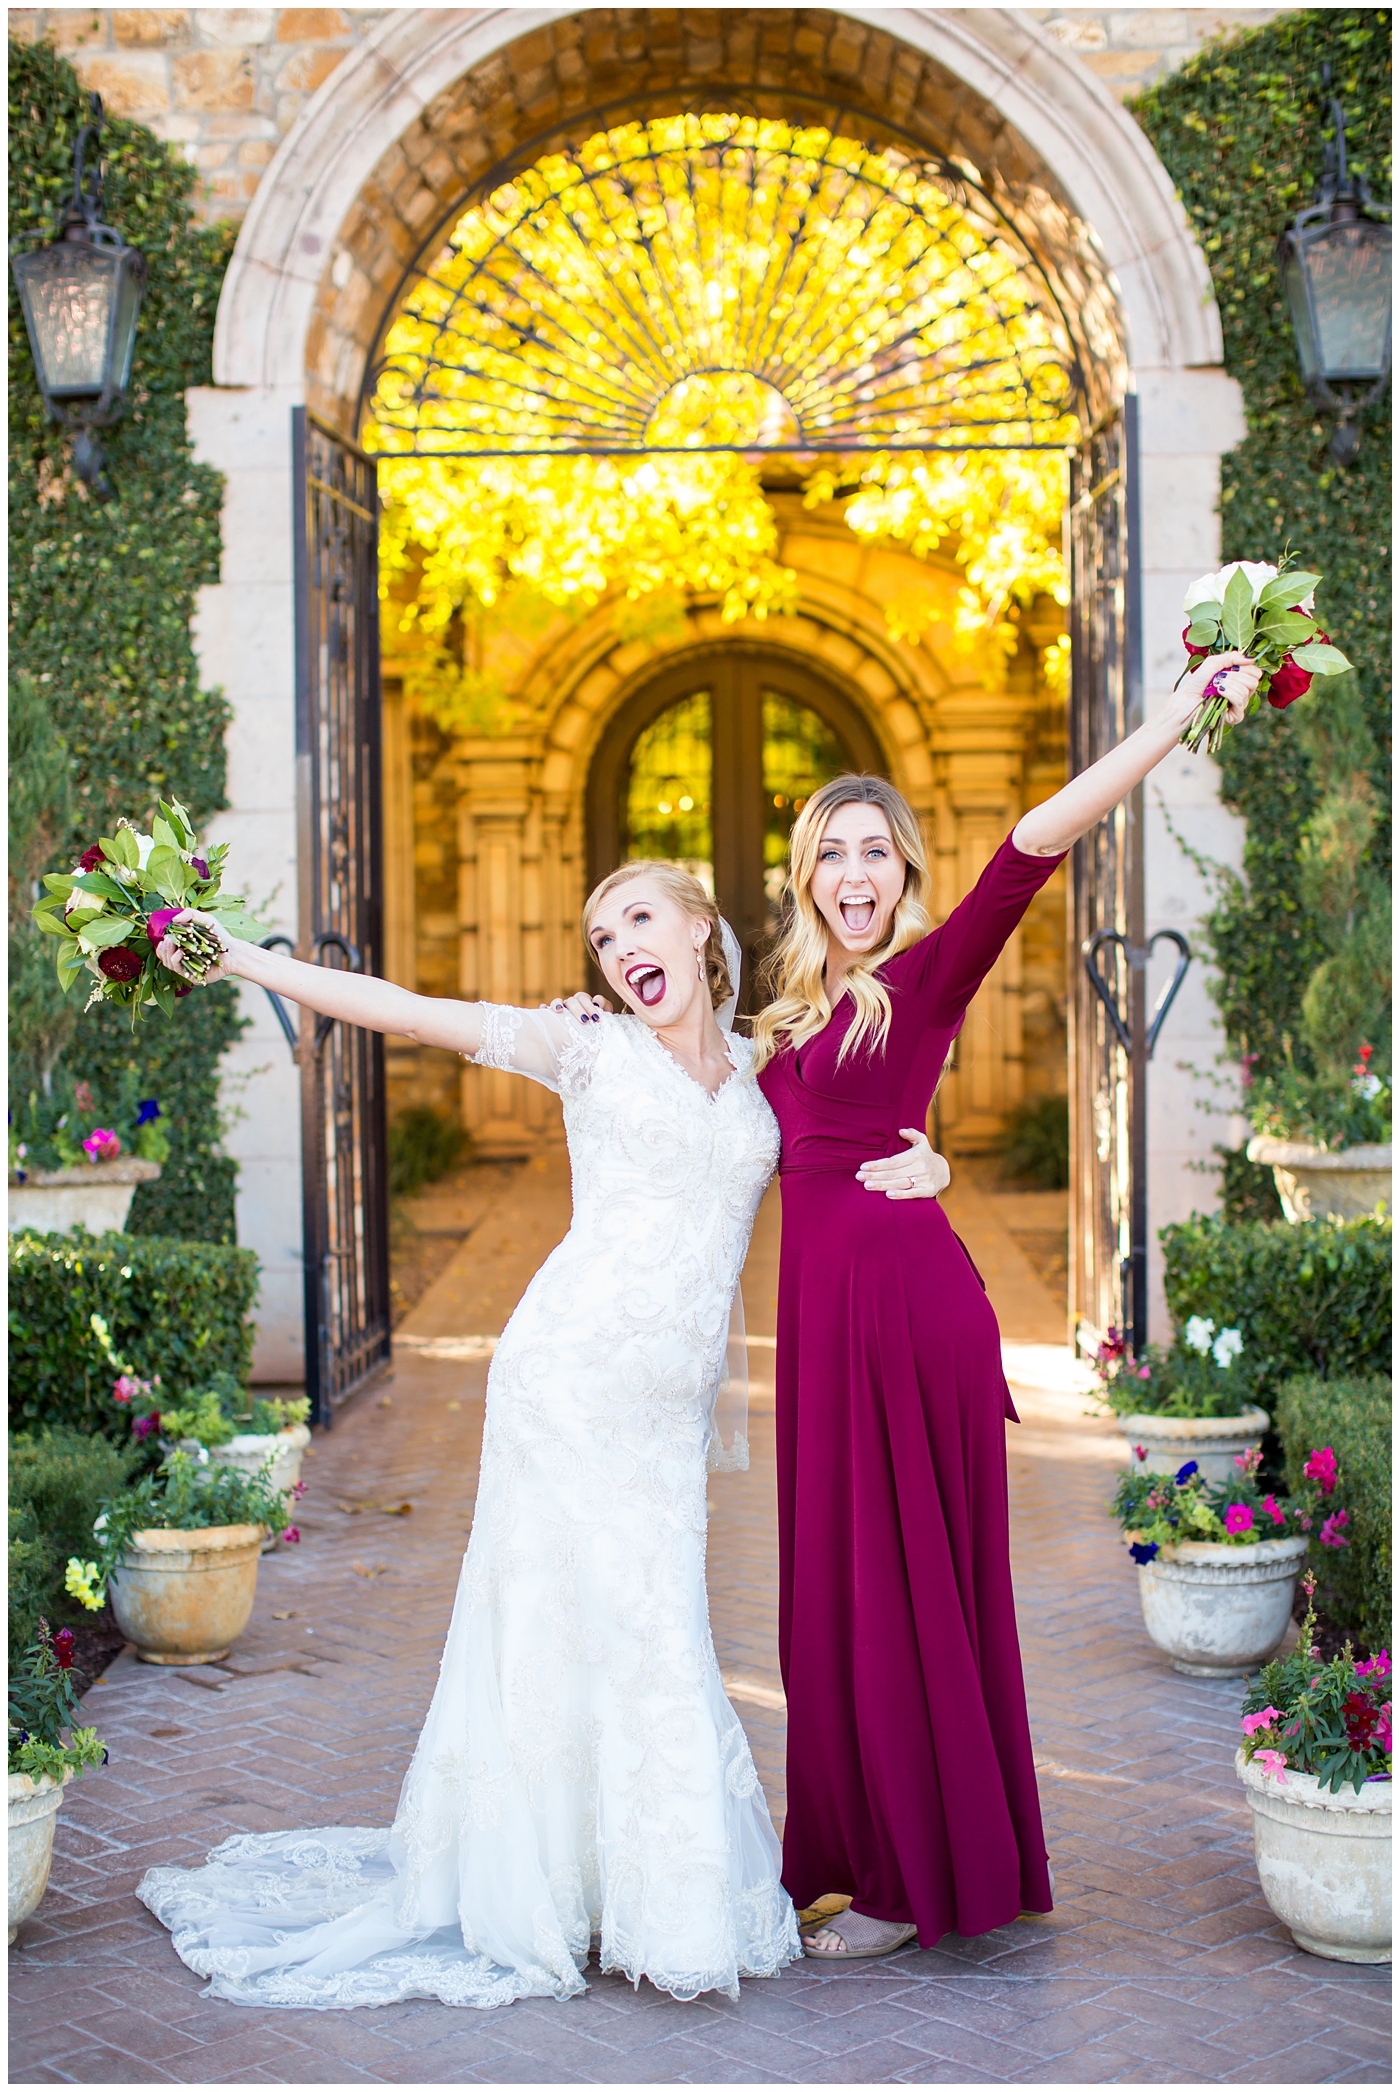 bride in sleeved lace dress with burgundy, white, and green wedding bouquet with bridesmaids in long sleeve burgundy dresses wedding day portrait at Villa Siena